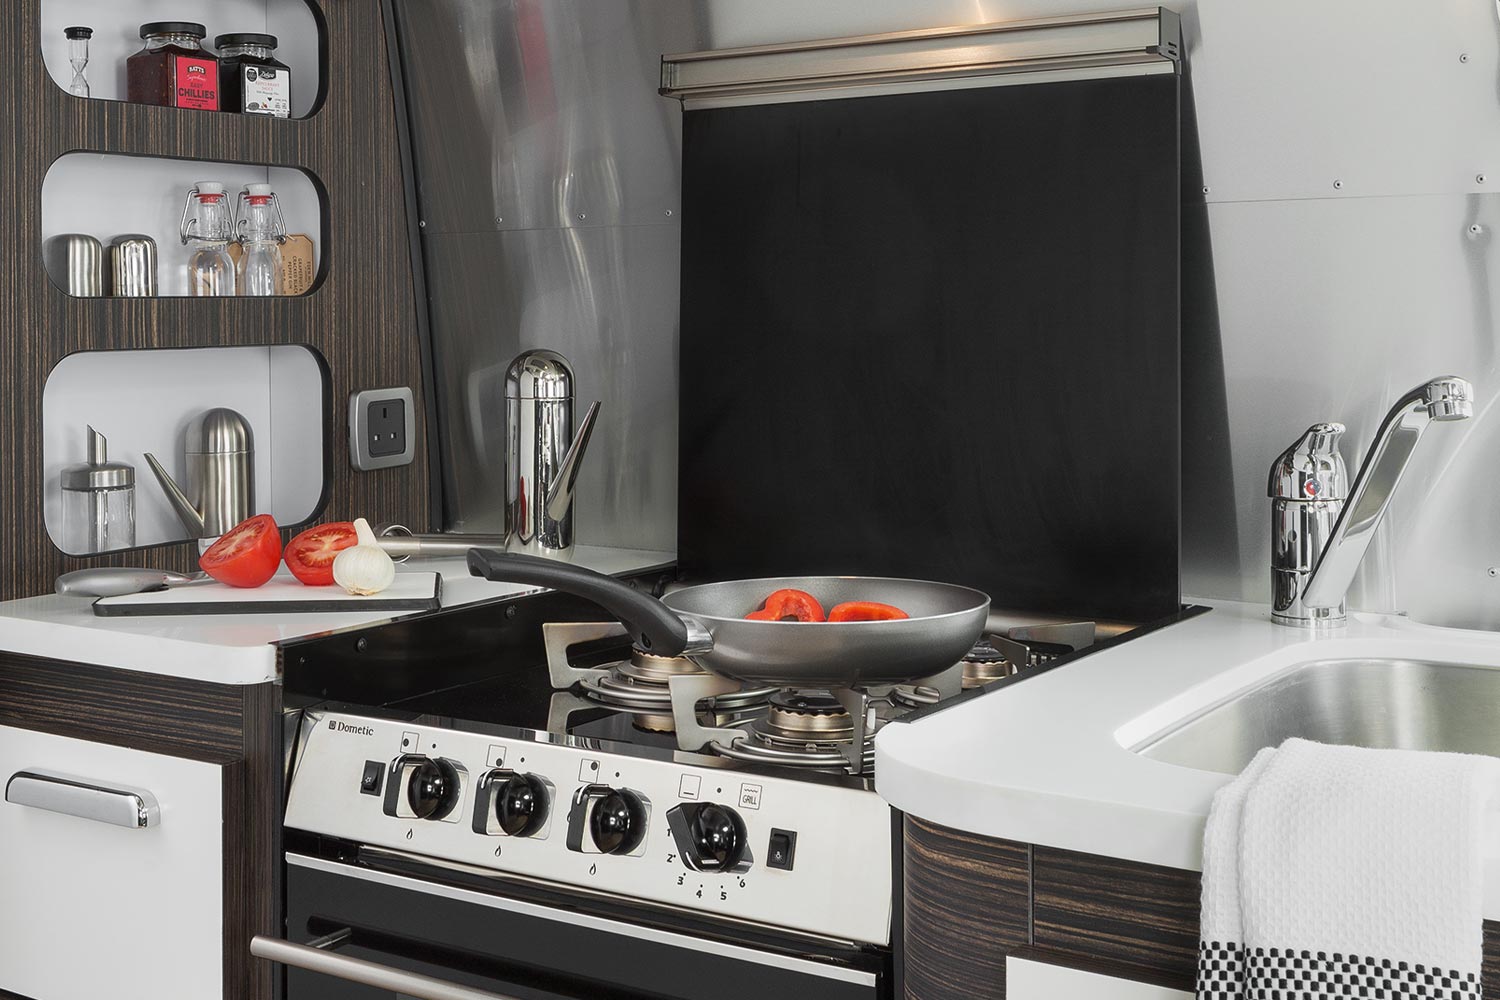 Our Guide To Caravan Cooktops